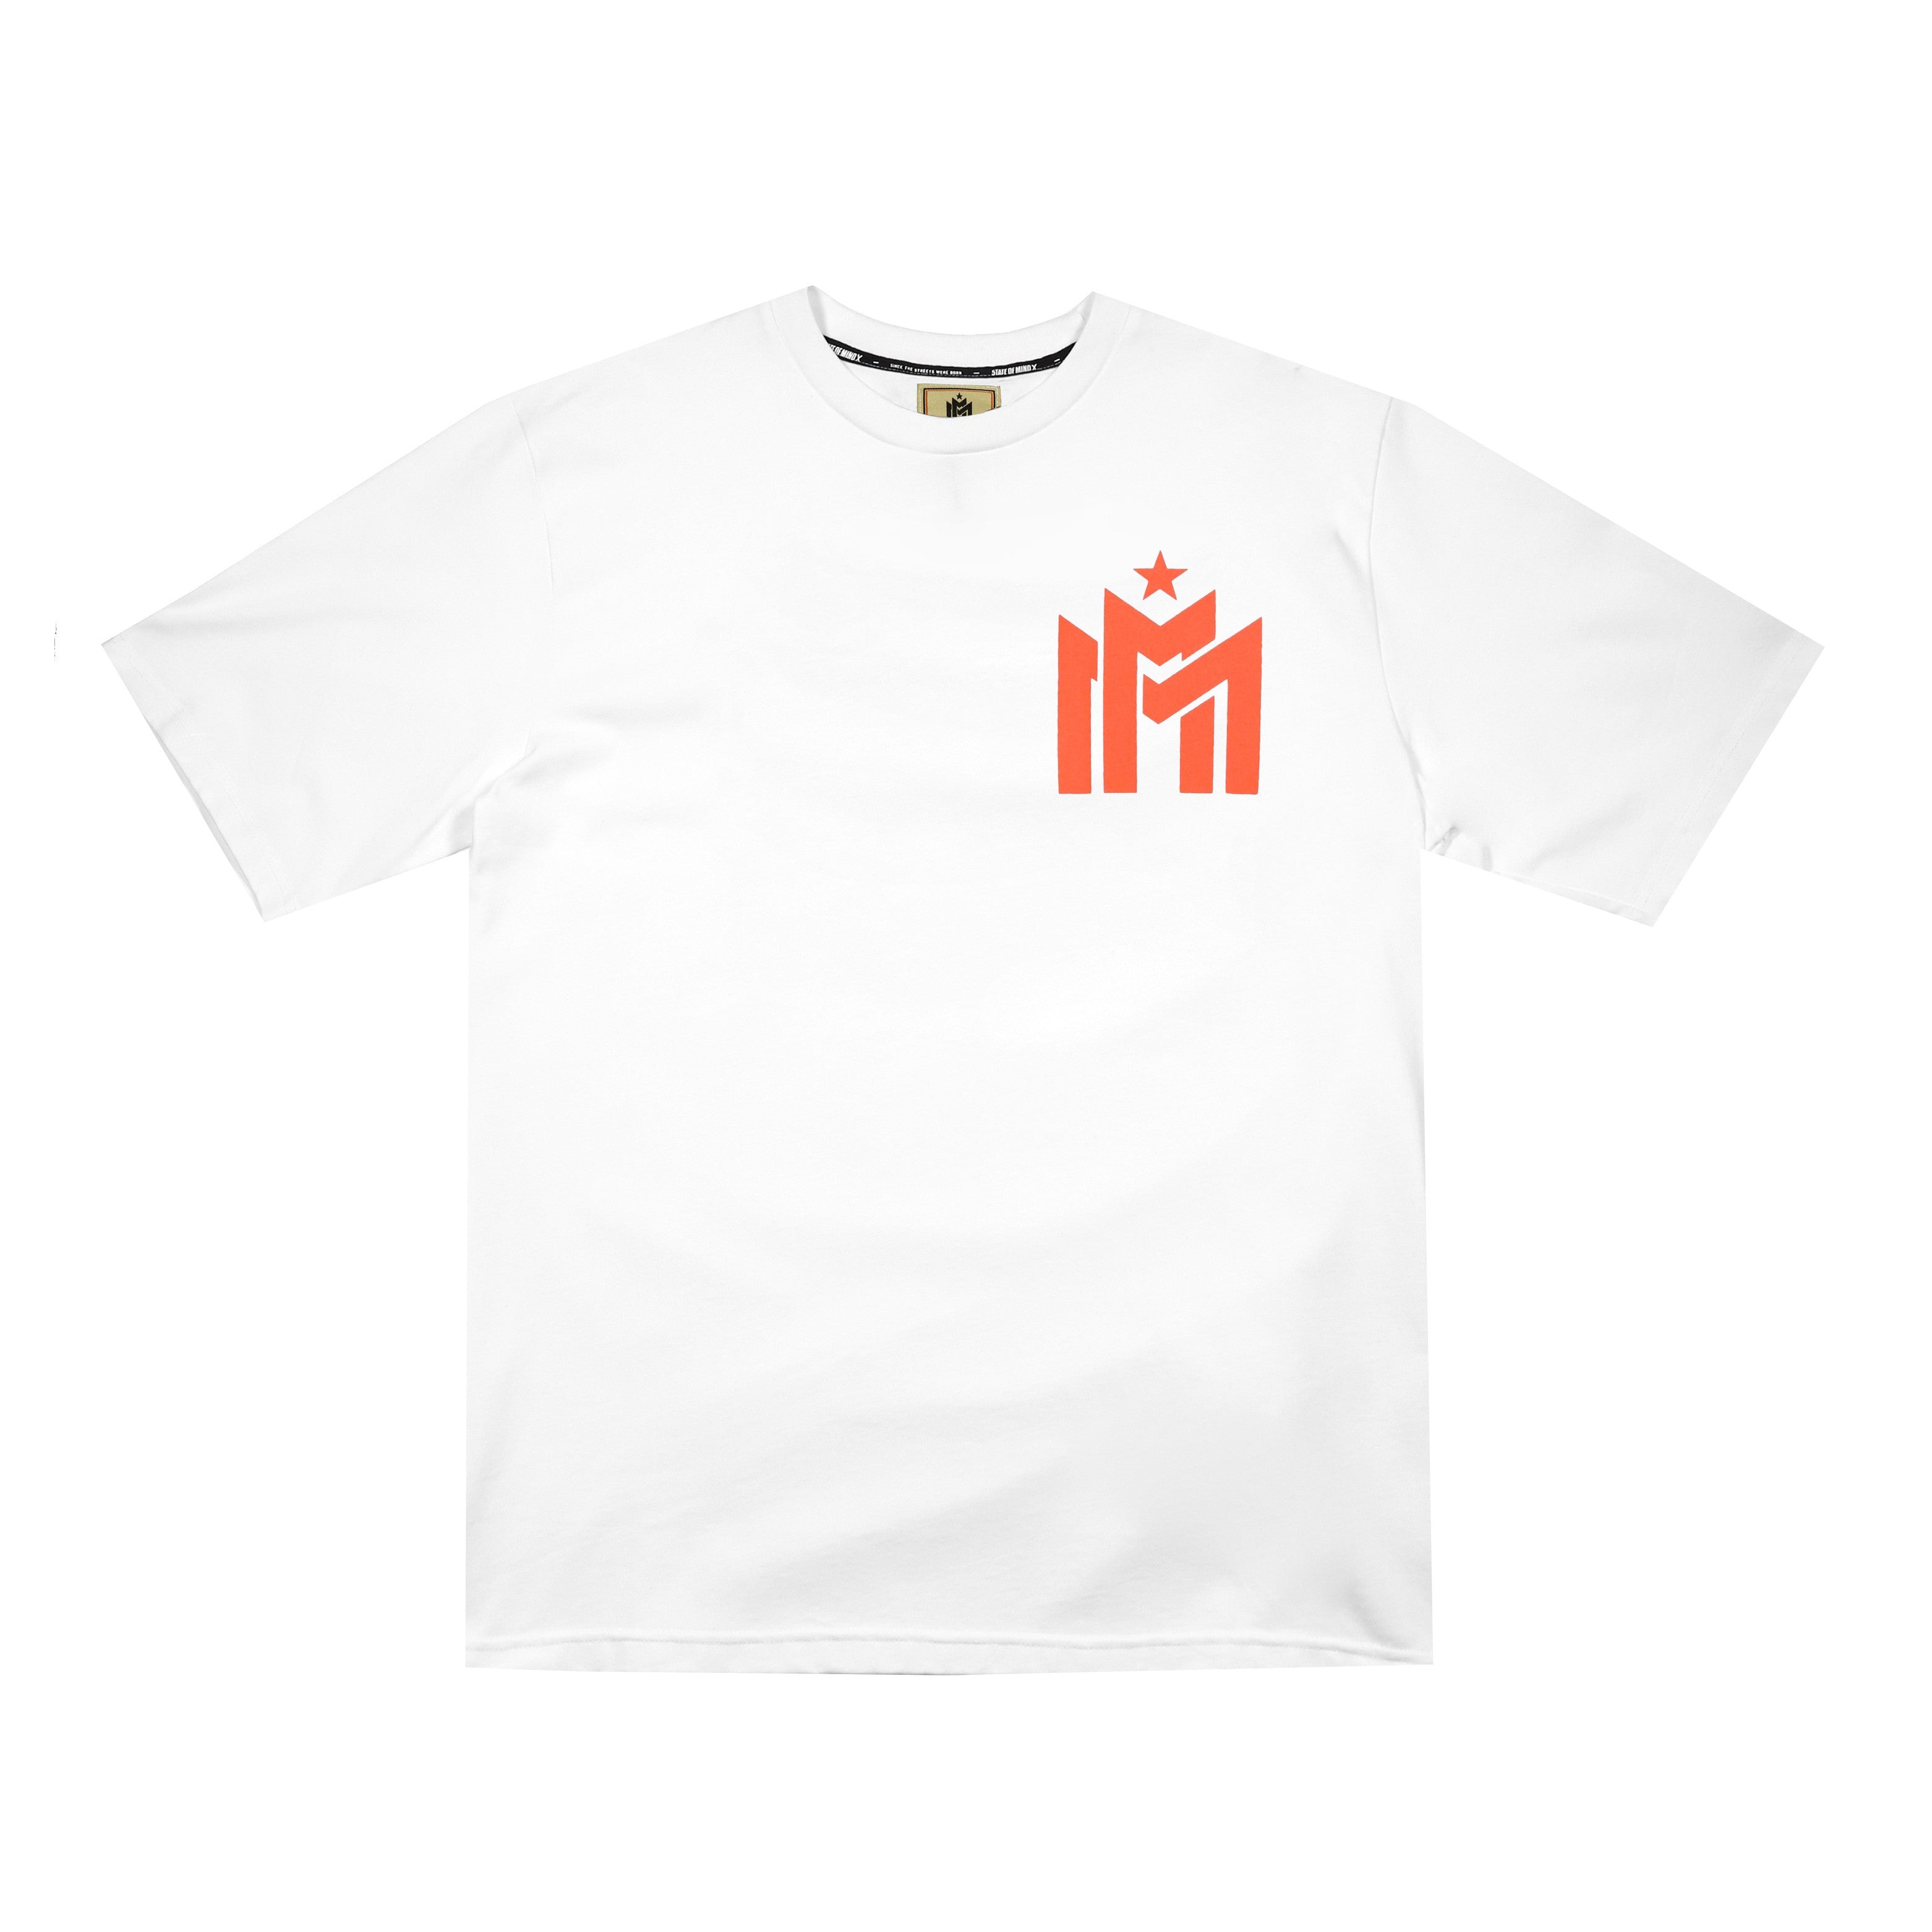 Maglietta Uomo Emme-i Miracles Tee X Gue' White